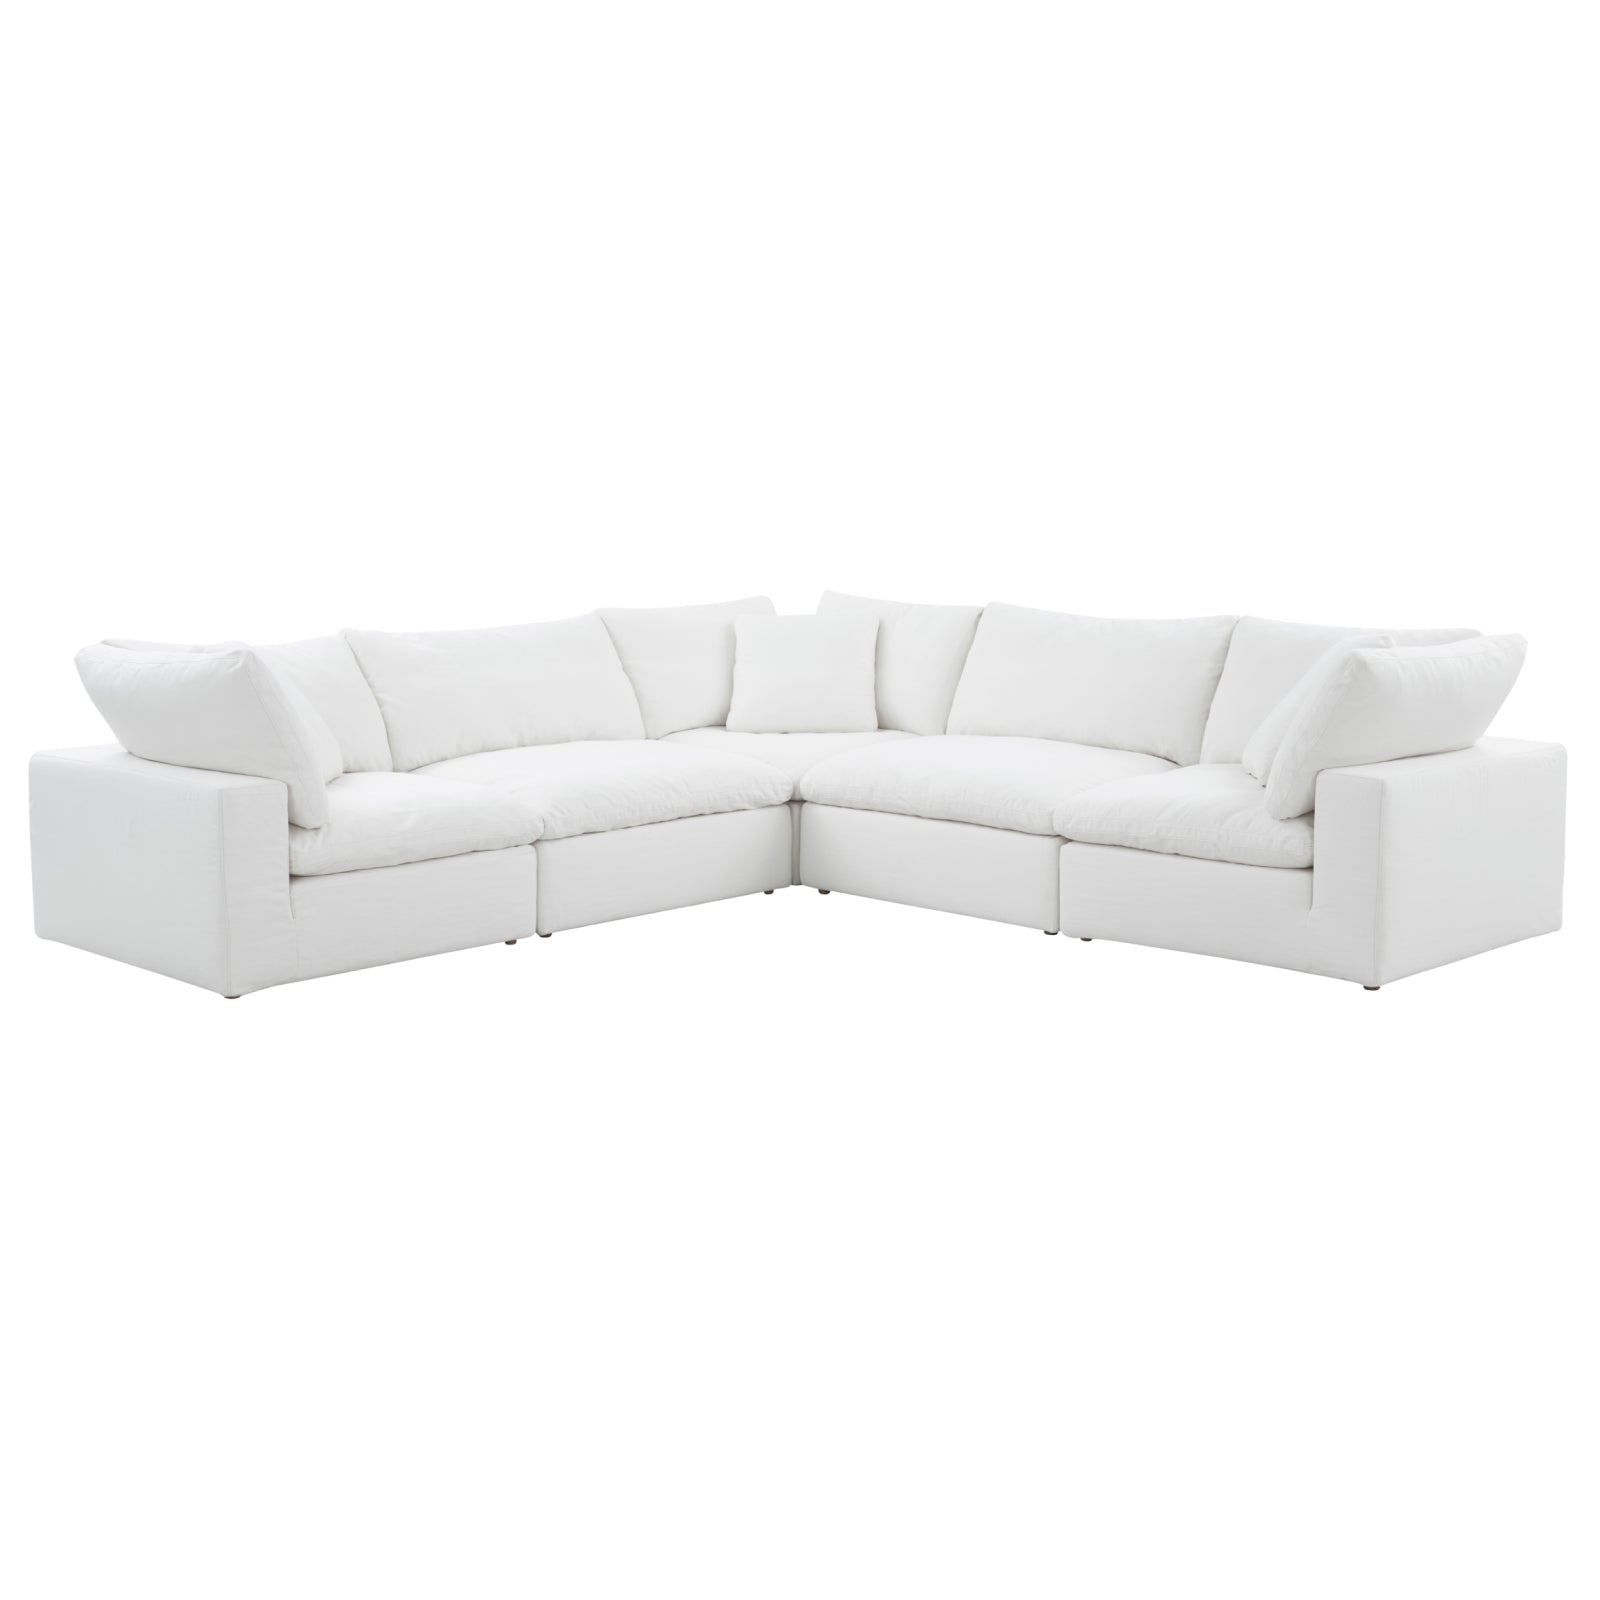 Movie Night™ 5-Piece Modular Sectional Closed, Standard, Brie - Image 12